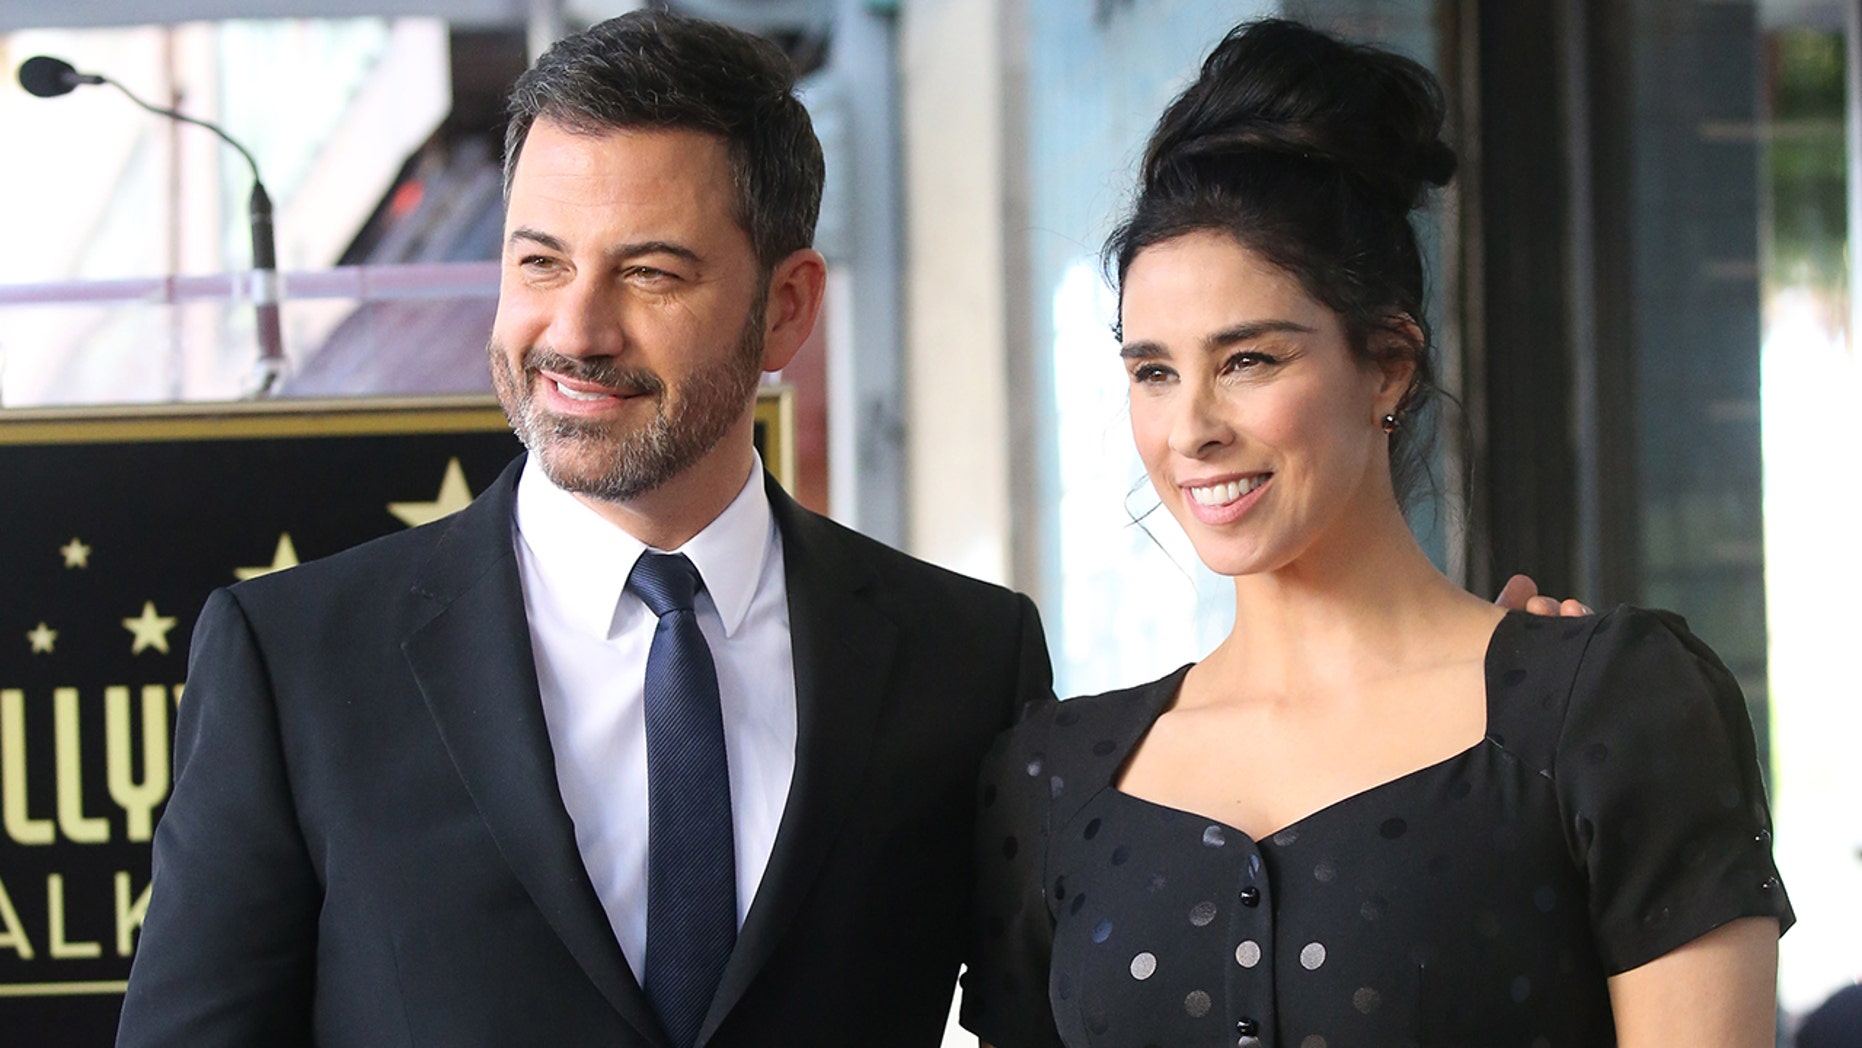 Jimmy Fallon Having Sex - Jimmy Kimmel opens up about being friends with ex-girlfriend ...